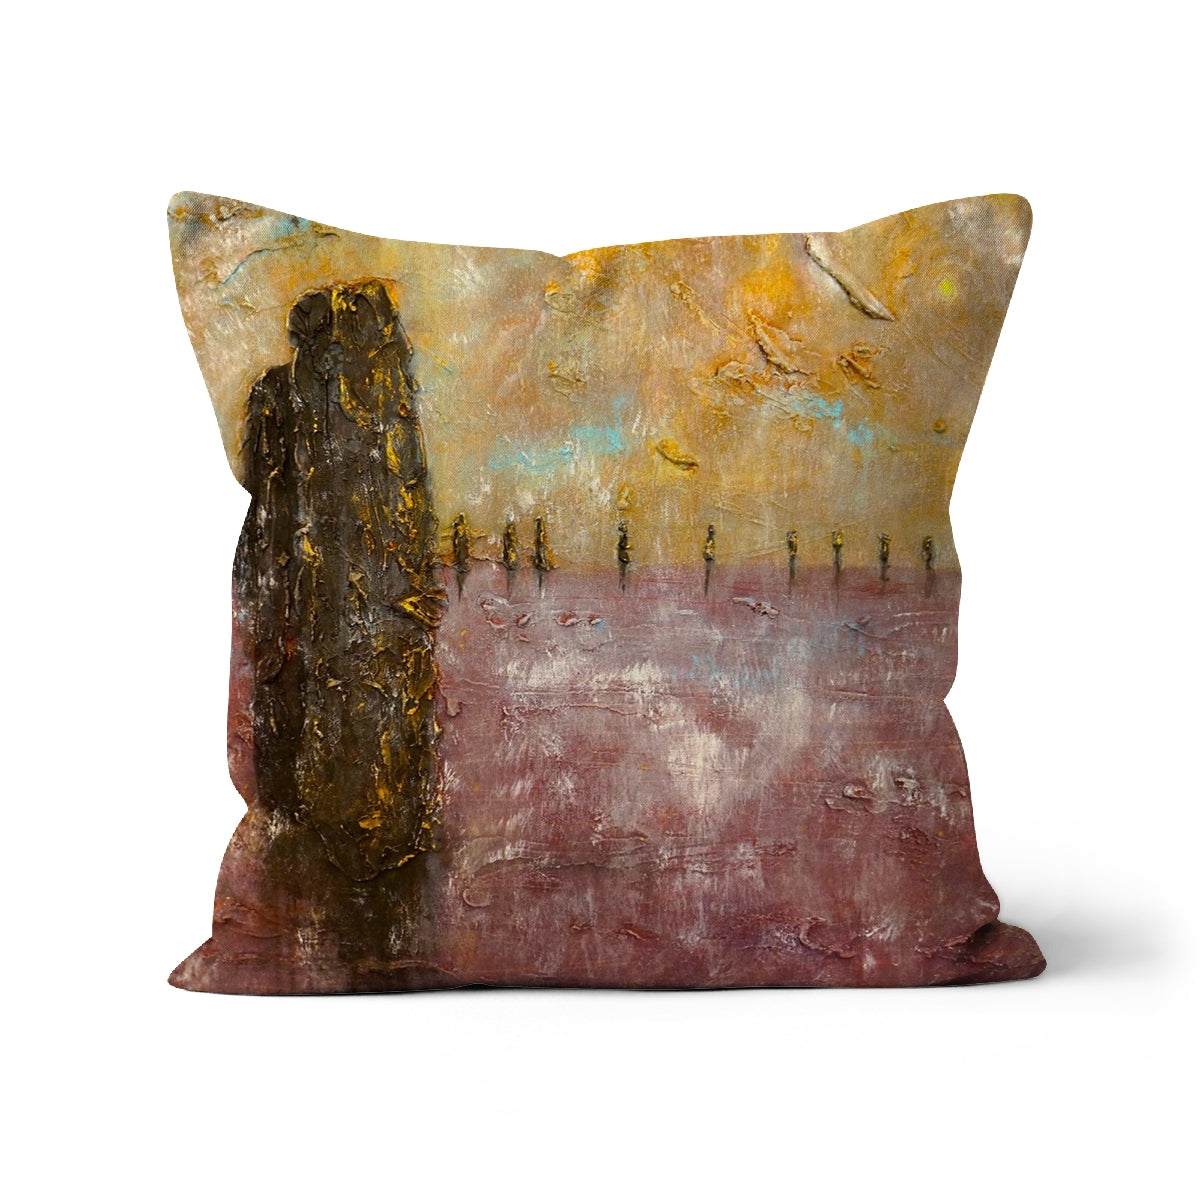 Brodgar Mist Orkney Art Gifts Cushion-Cushions-Orkney Art Gallery-Faux Suede-18"x18"-Paintings, Prints, Homeware, Art Gifts From Scotland By Scottish Artist Kevin Hunter